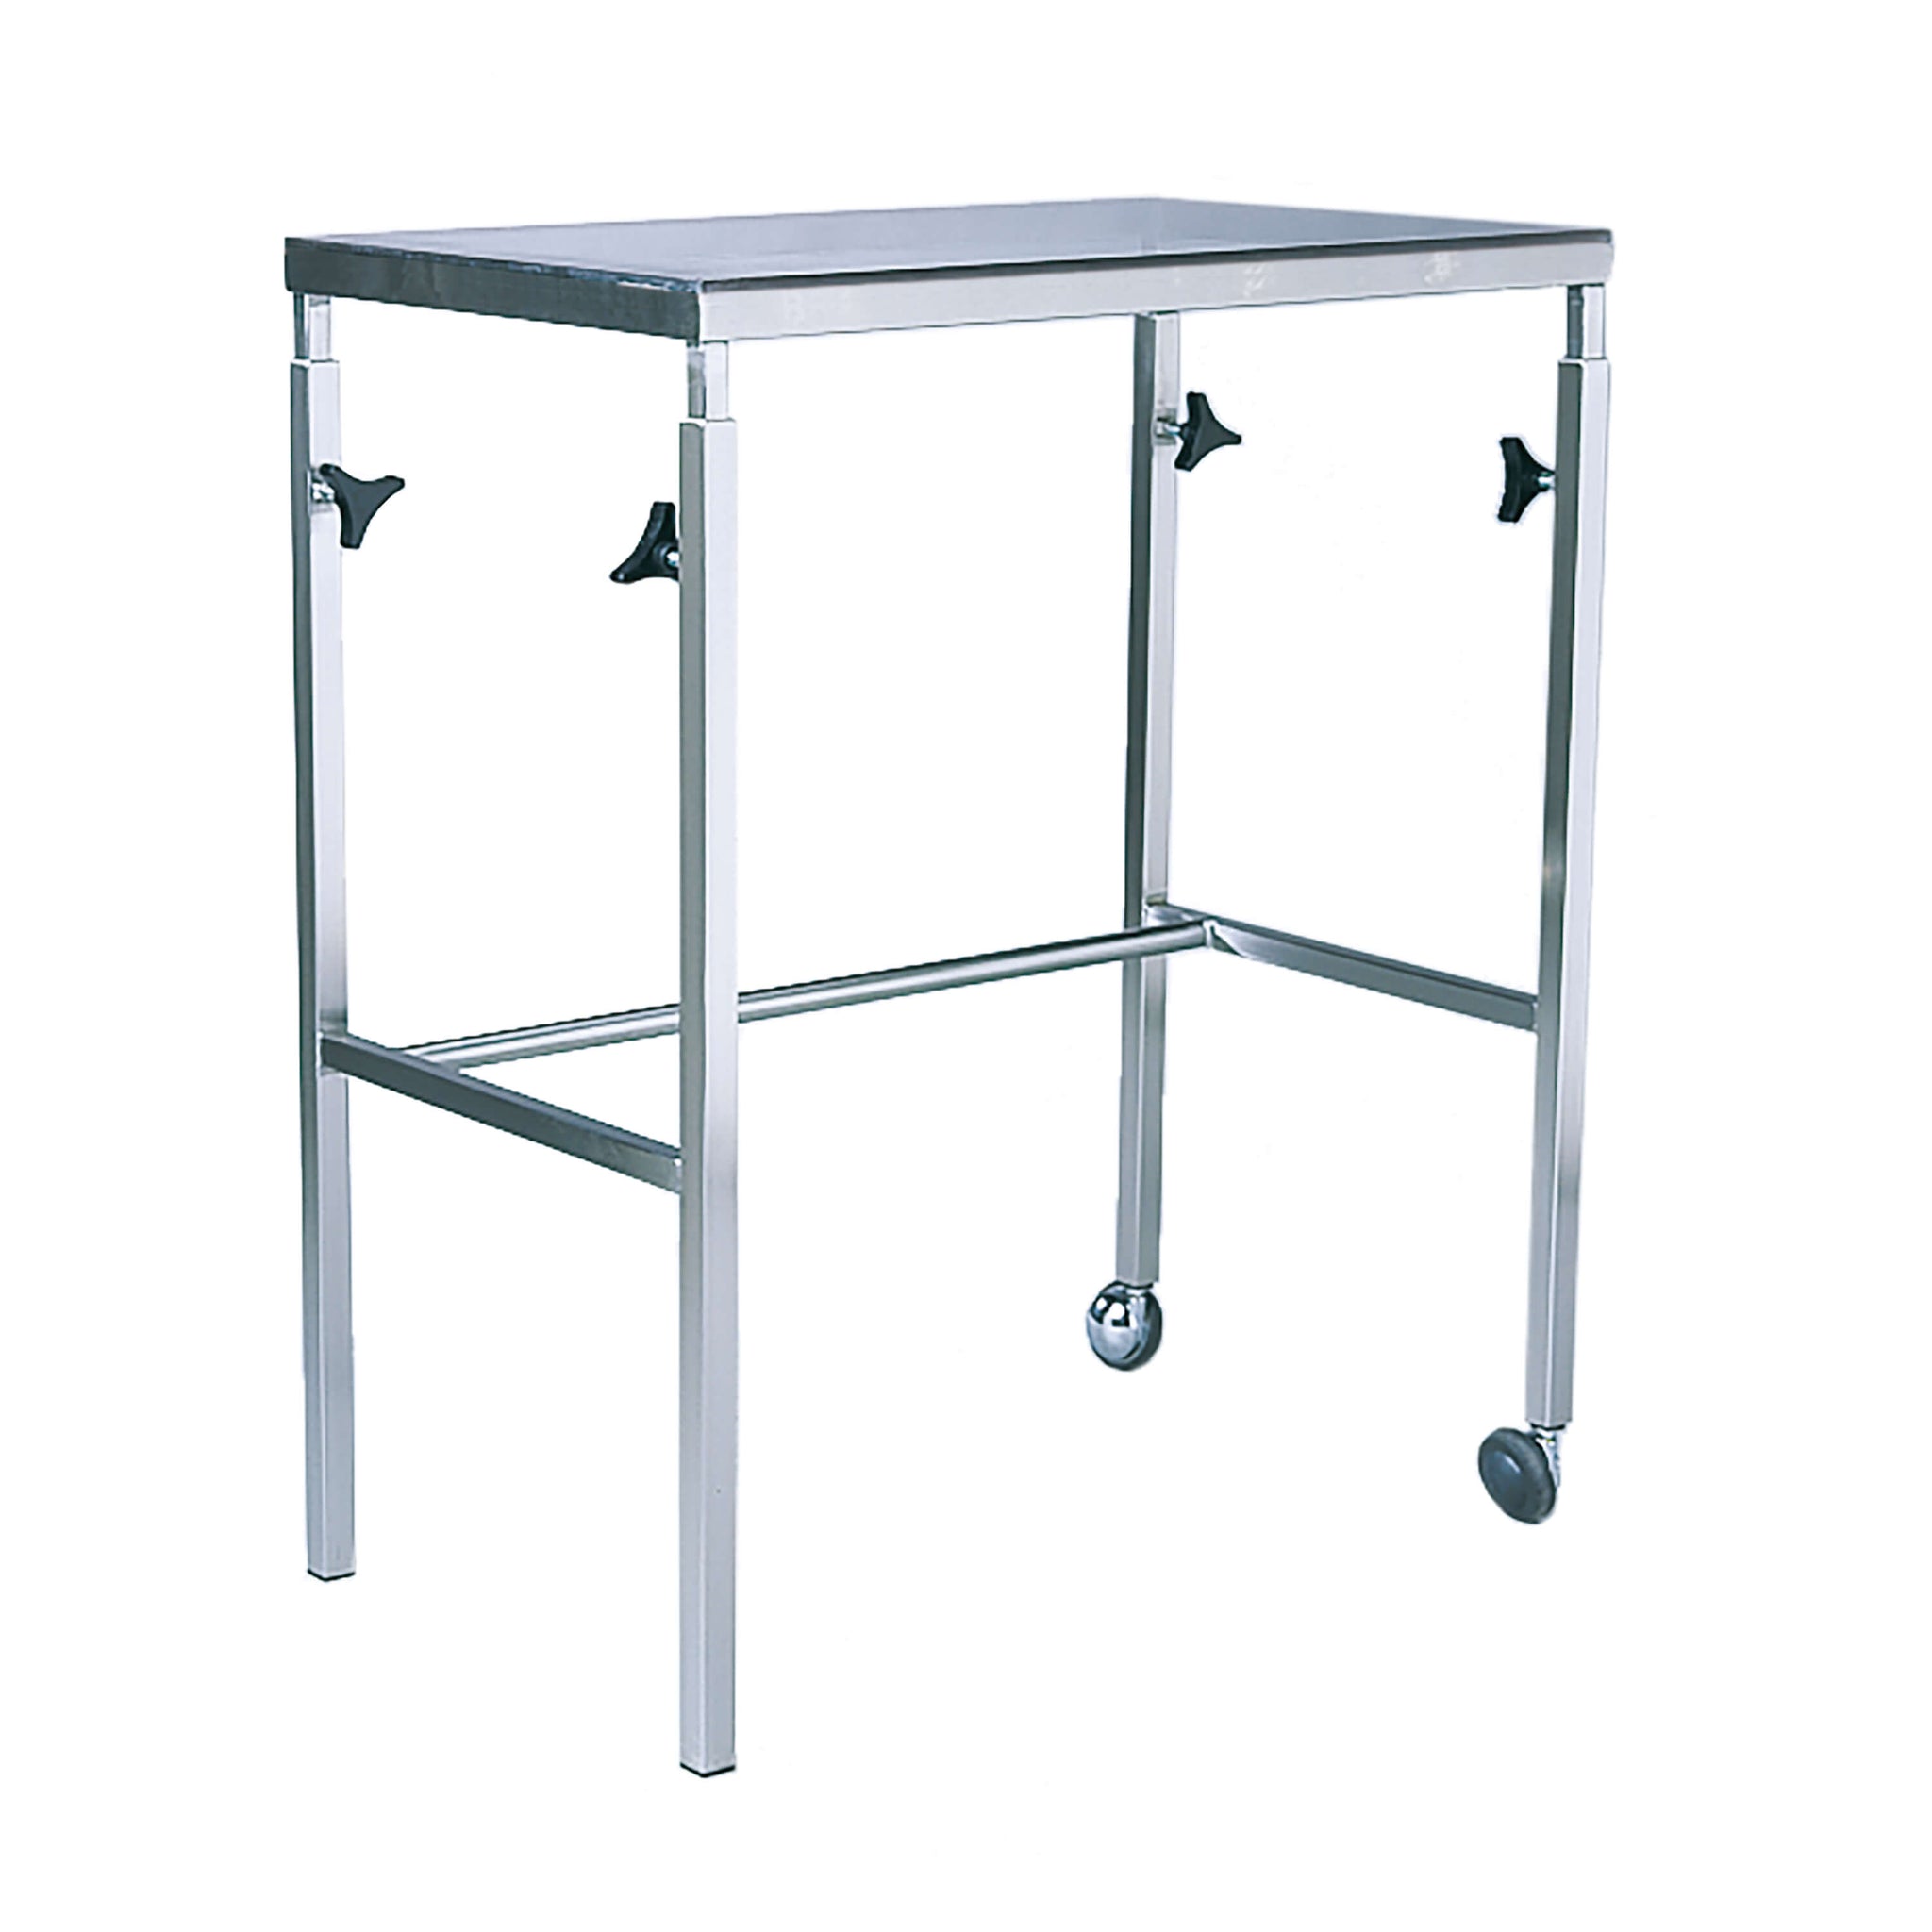 Arm Table - Adjustable Height, 750 X 490 mm